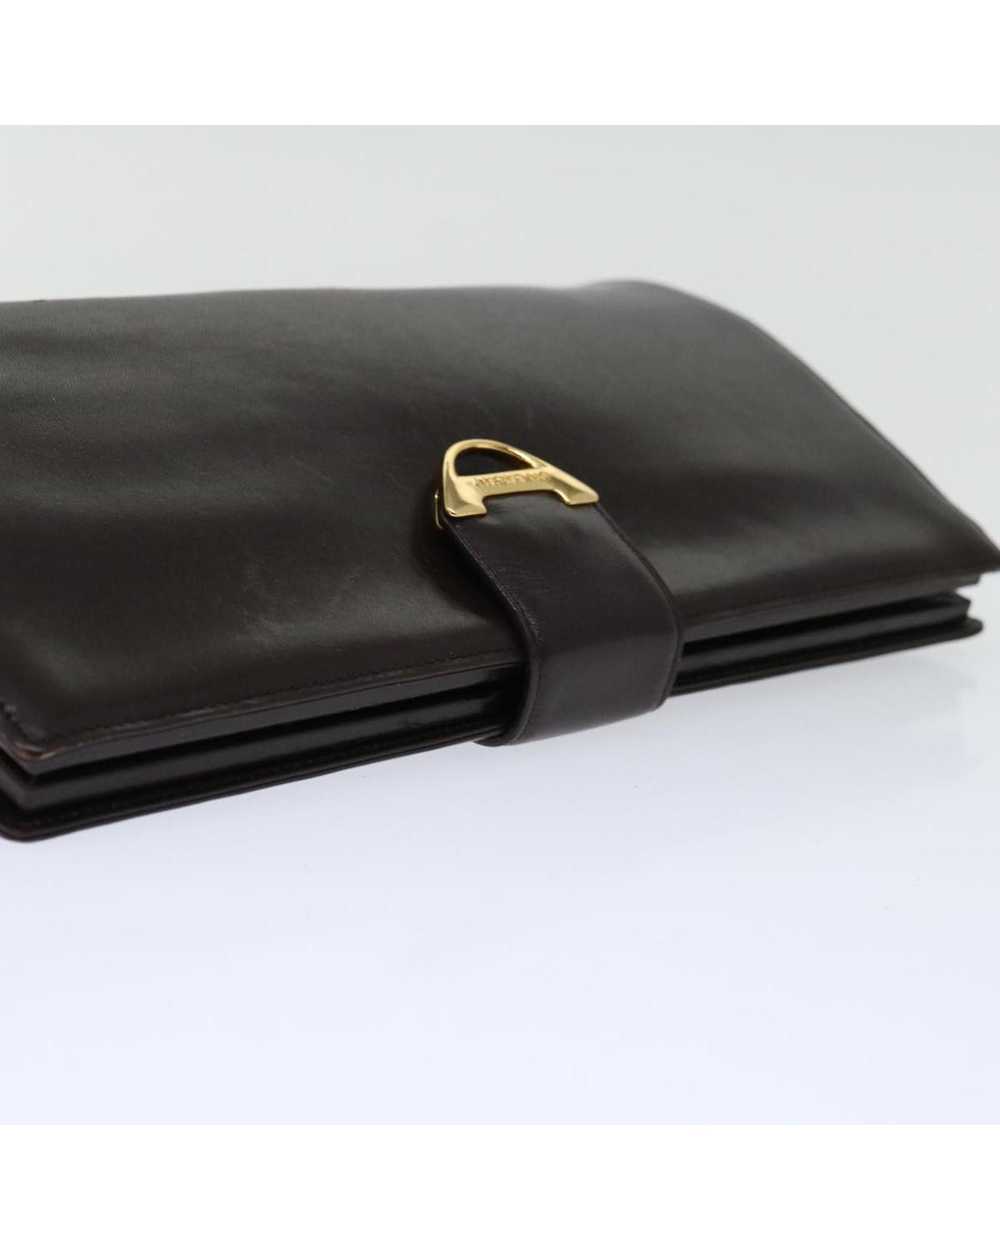 Givenchy Brown Leather Clutch Bag with Elegant De… - image 6